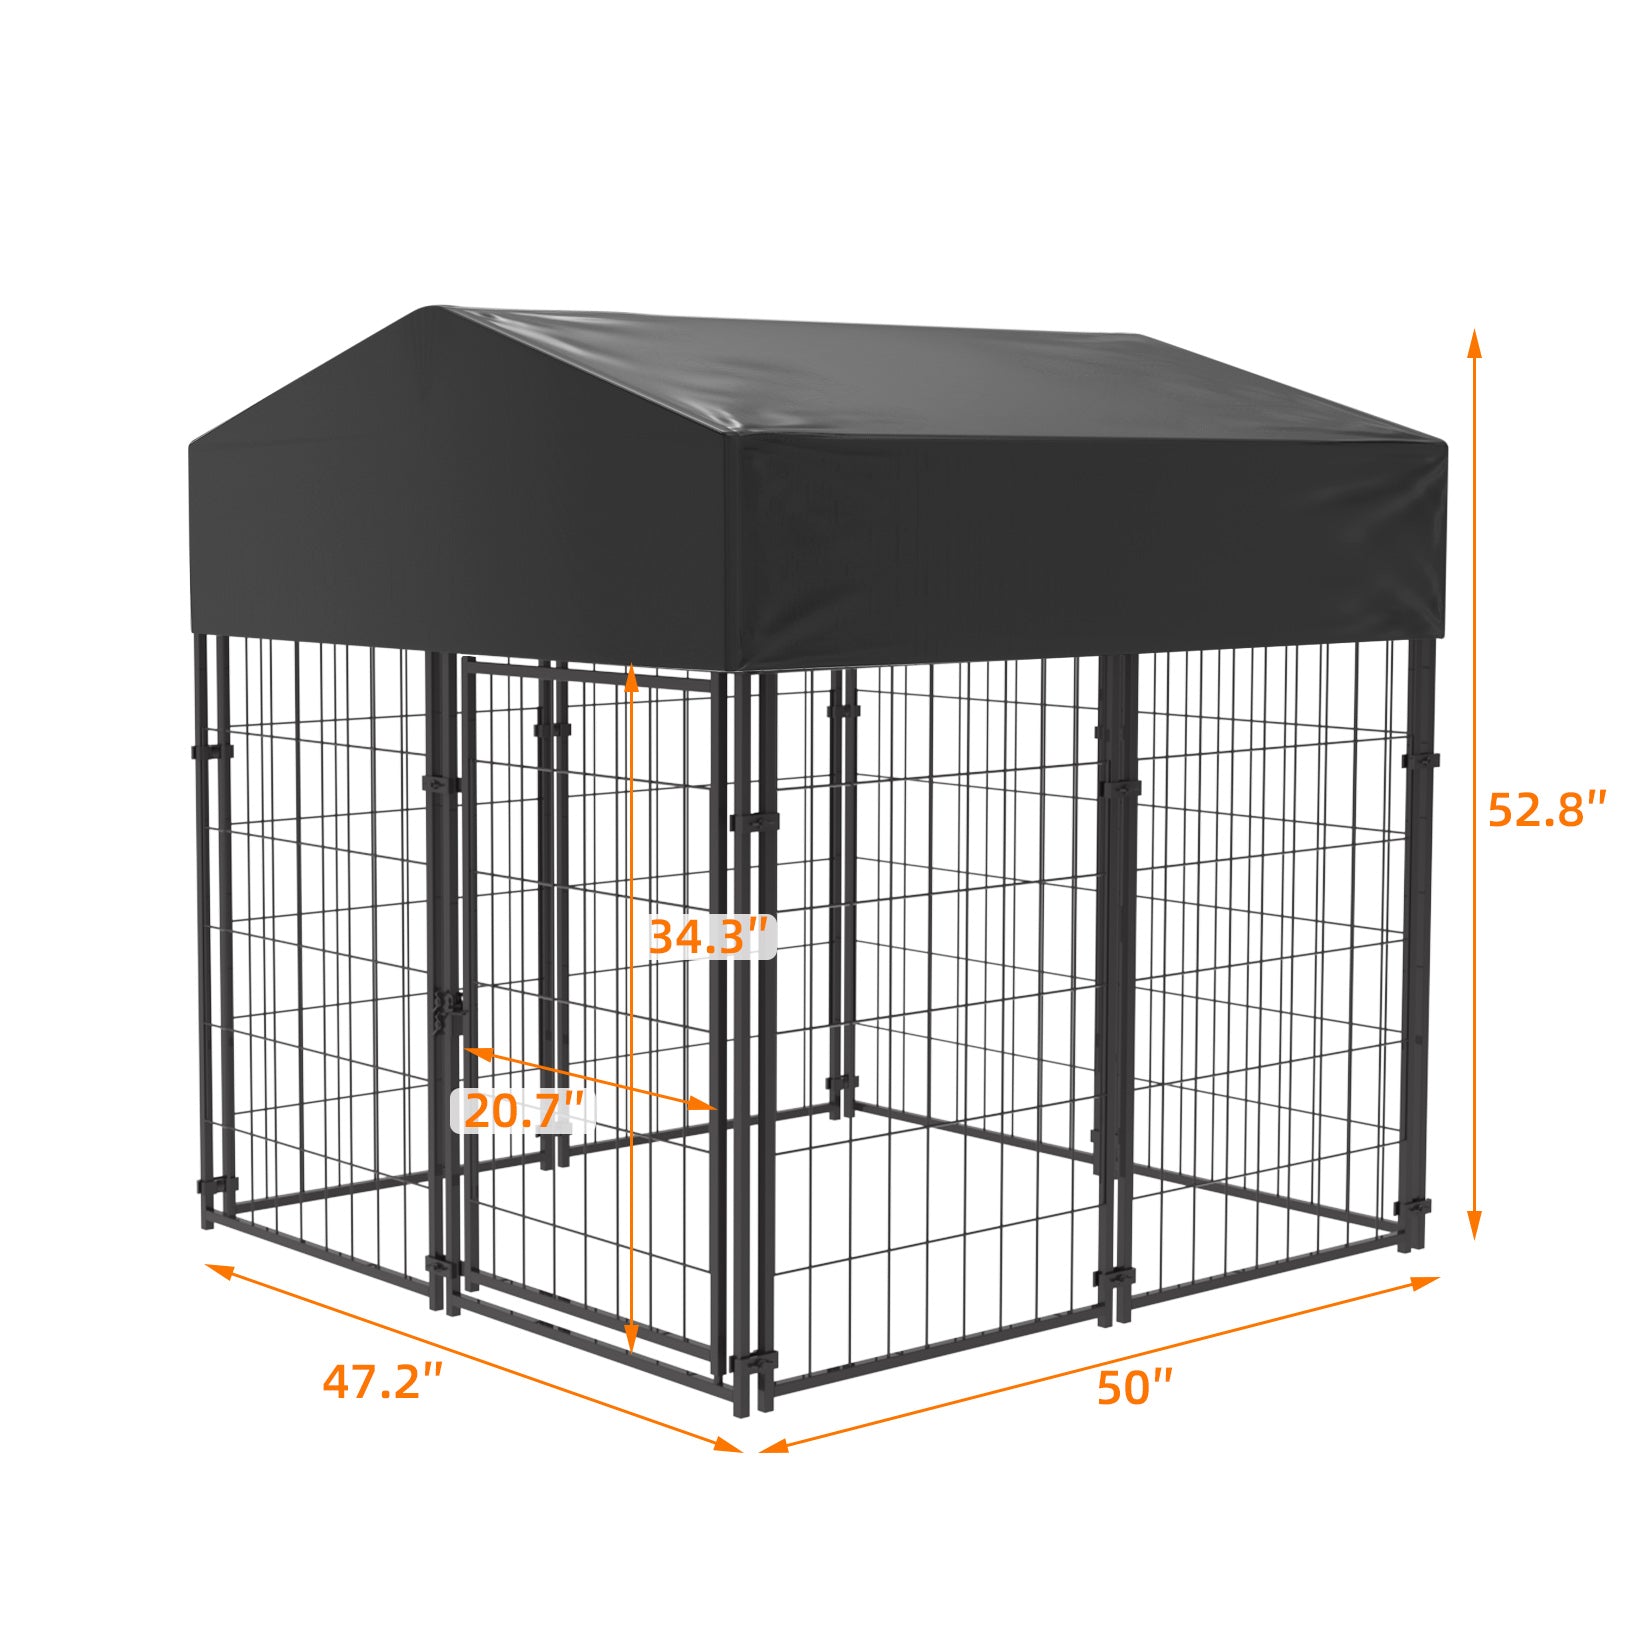 DII X-Large Gray Stripe Cage Mat - 25x39-in - Non-Slip Back - Machine  Washable - Pet Kennel & Crate Accessories - Dog/Cat - Extra Large in the Pet  Kennel & Crate Accessories